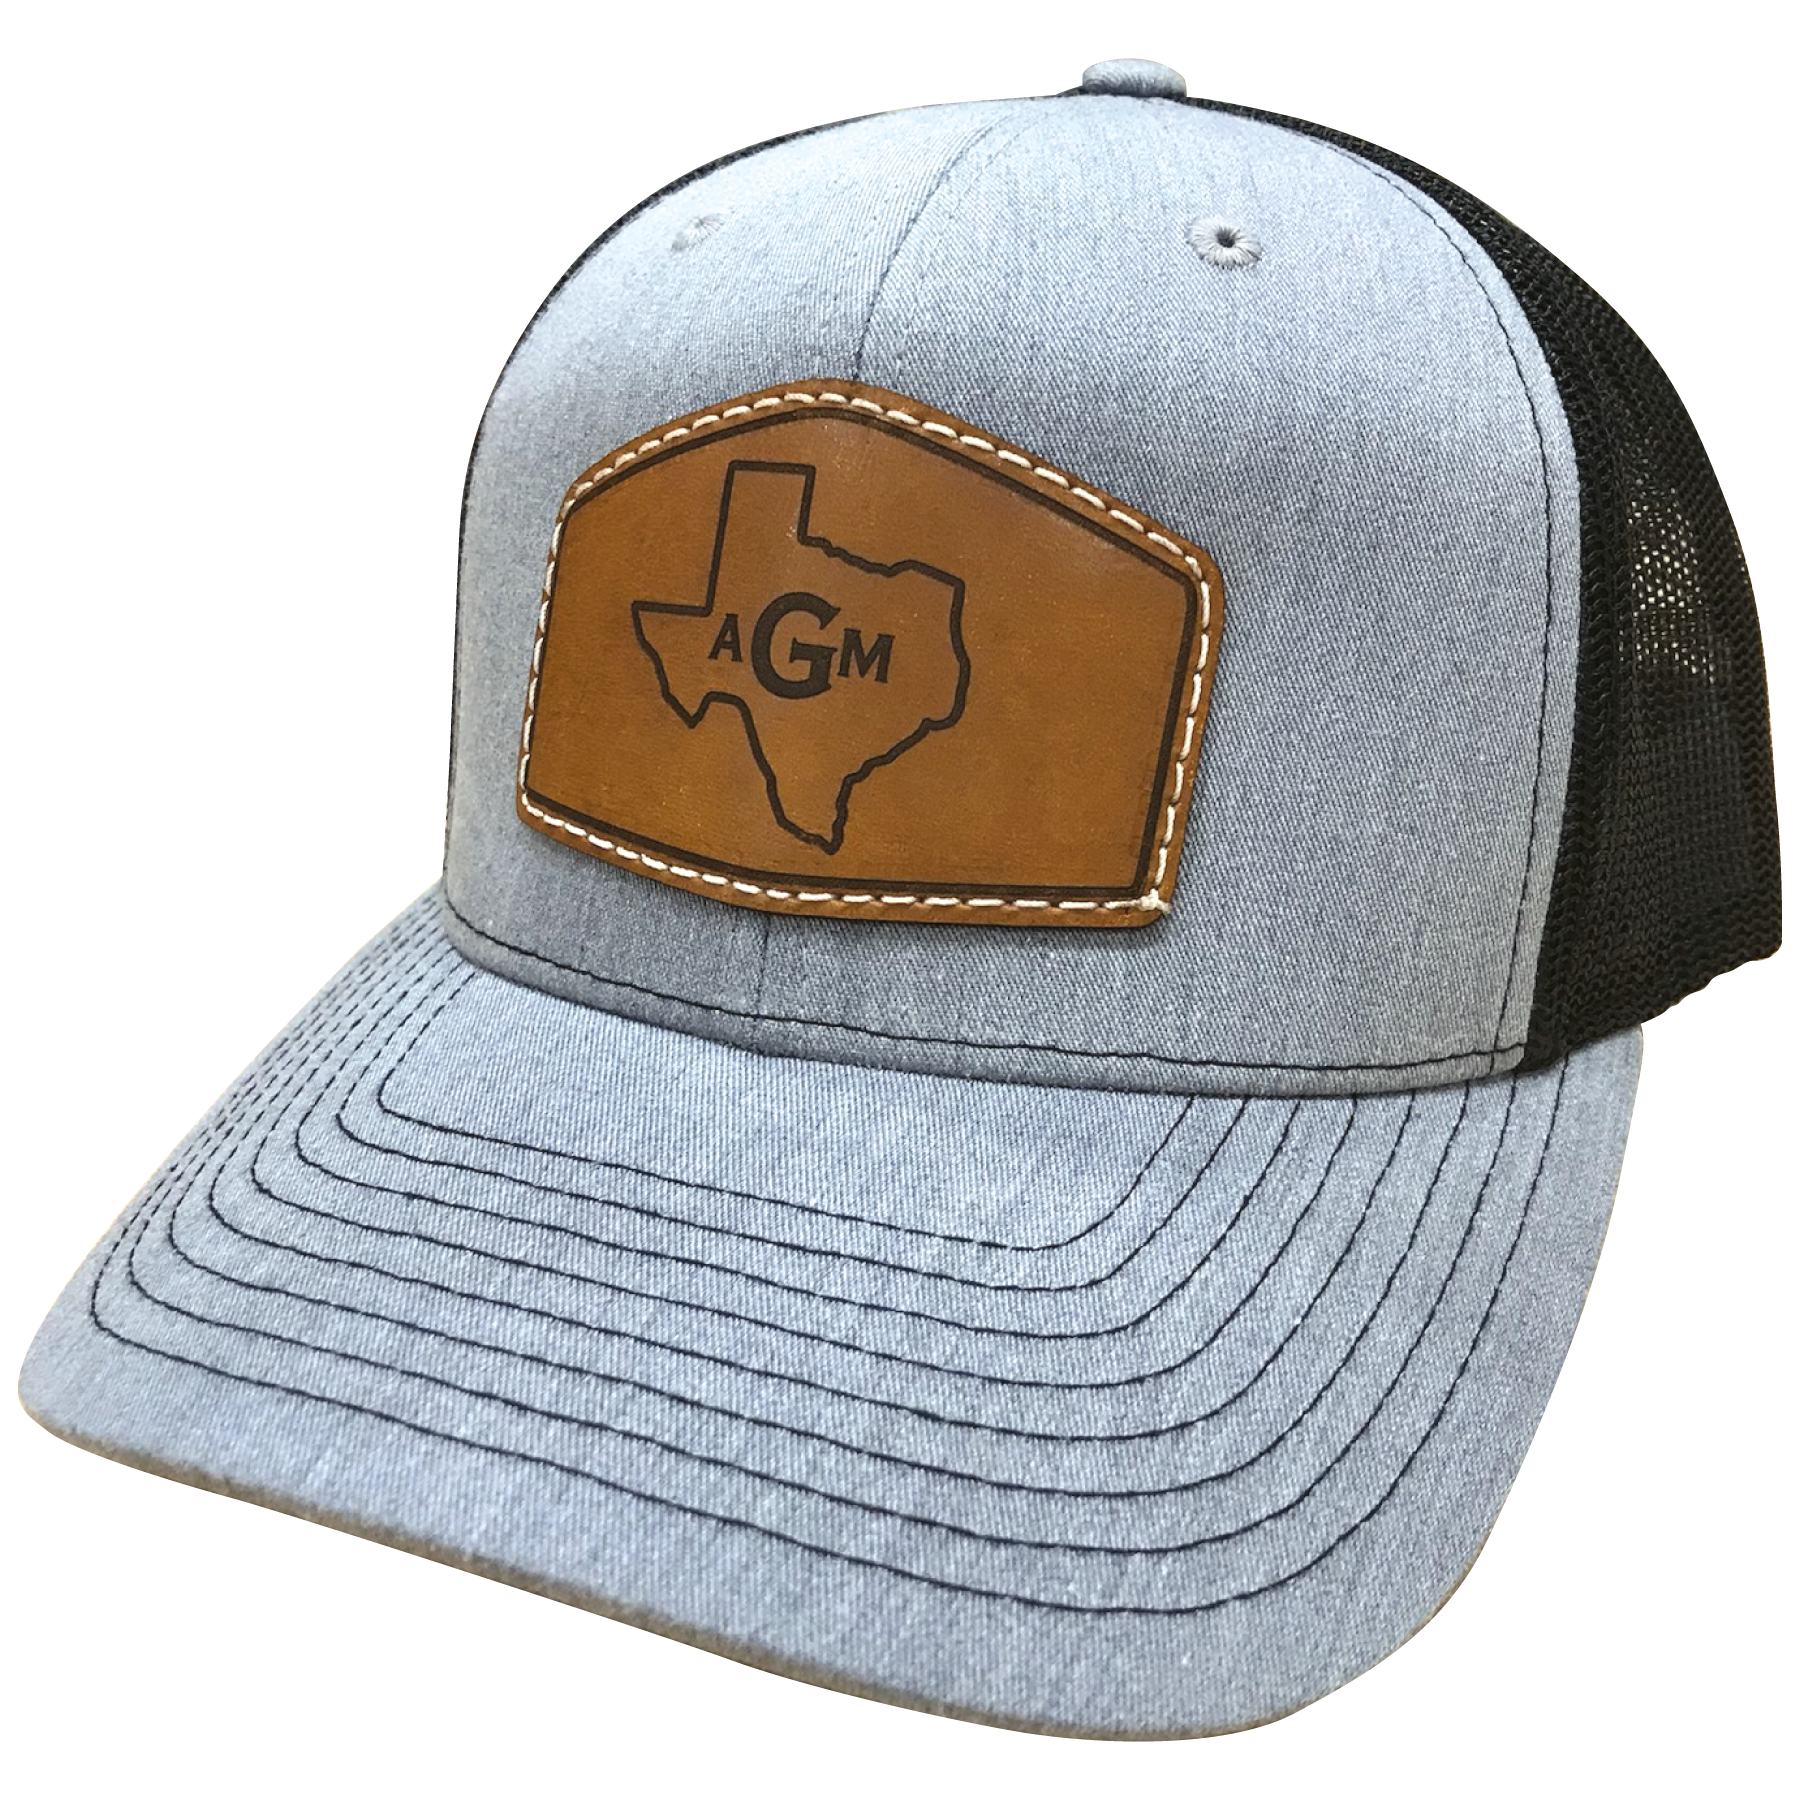 Custom Leather Patches on Trucker Hats